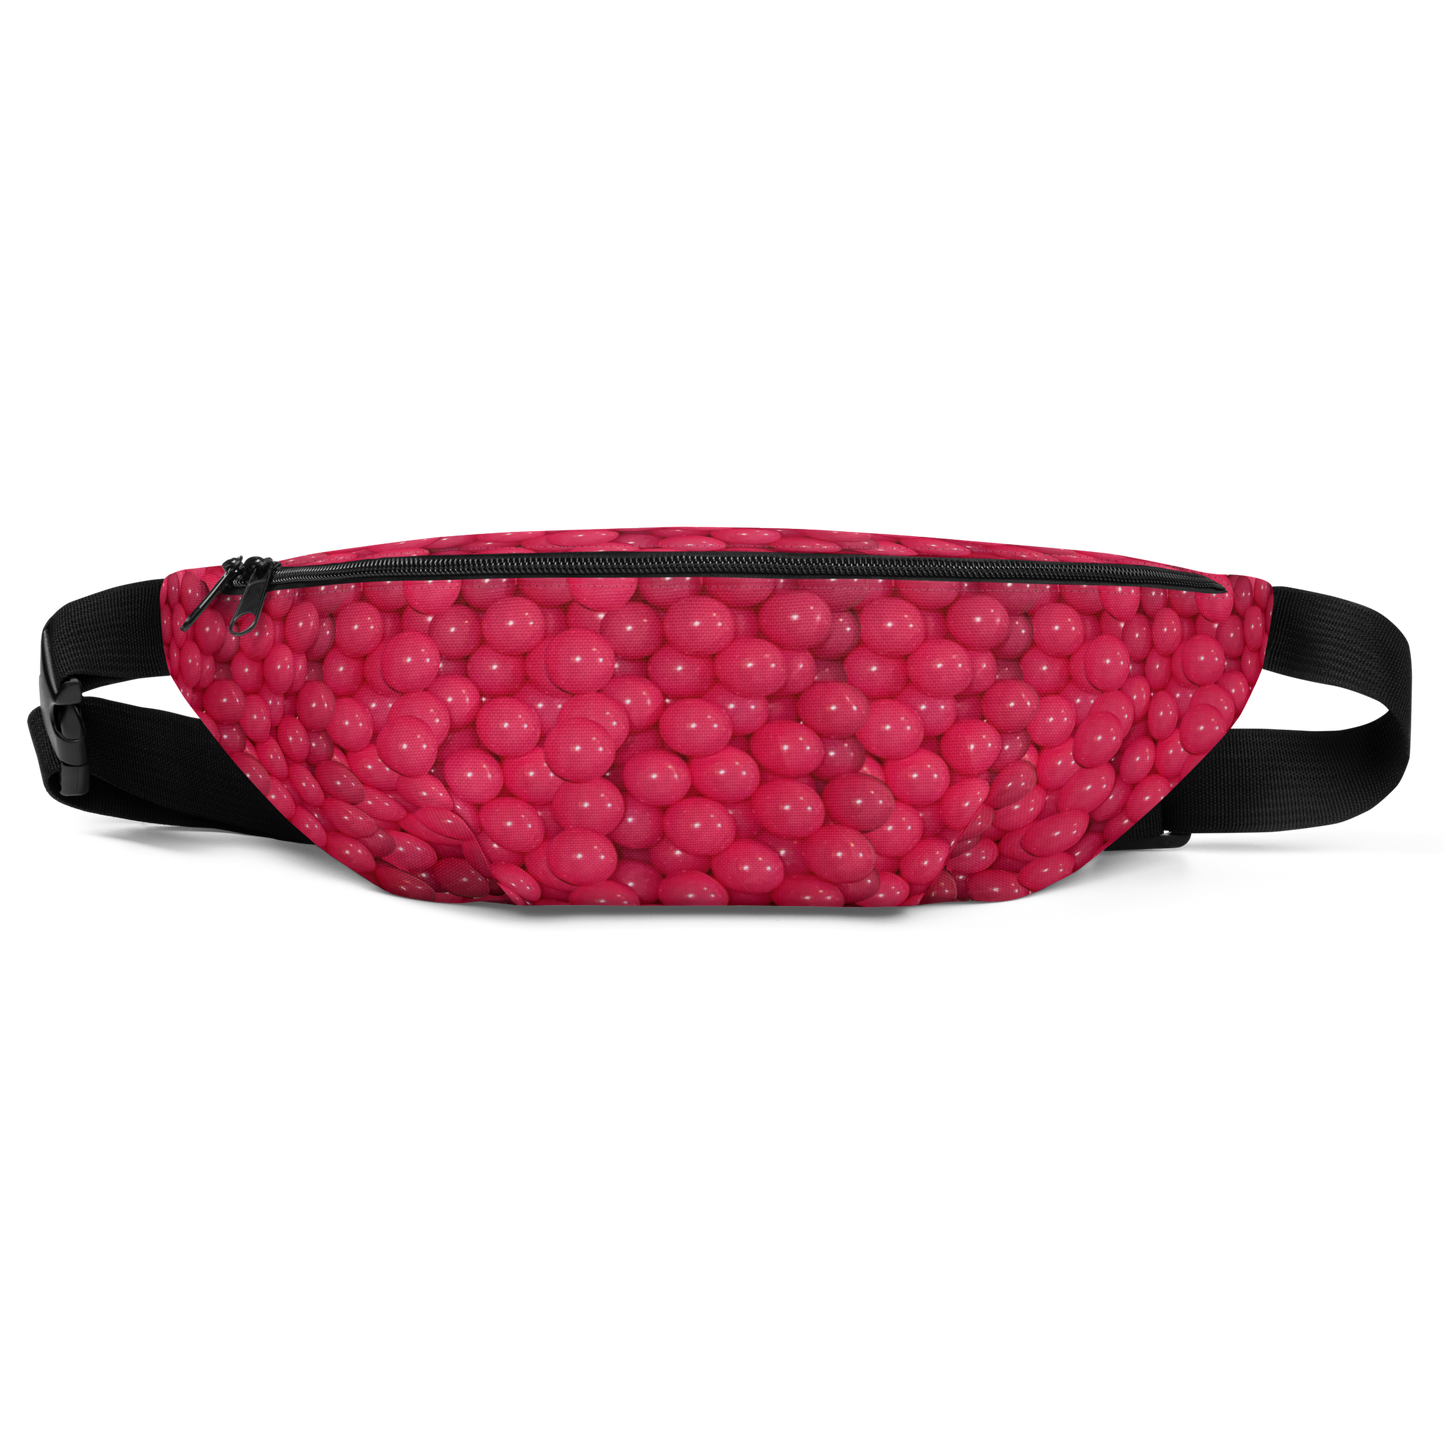 Ball Pit in Pink Fanny Pack